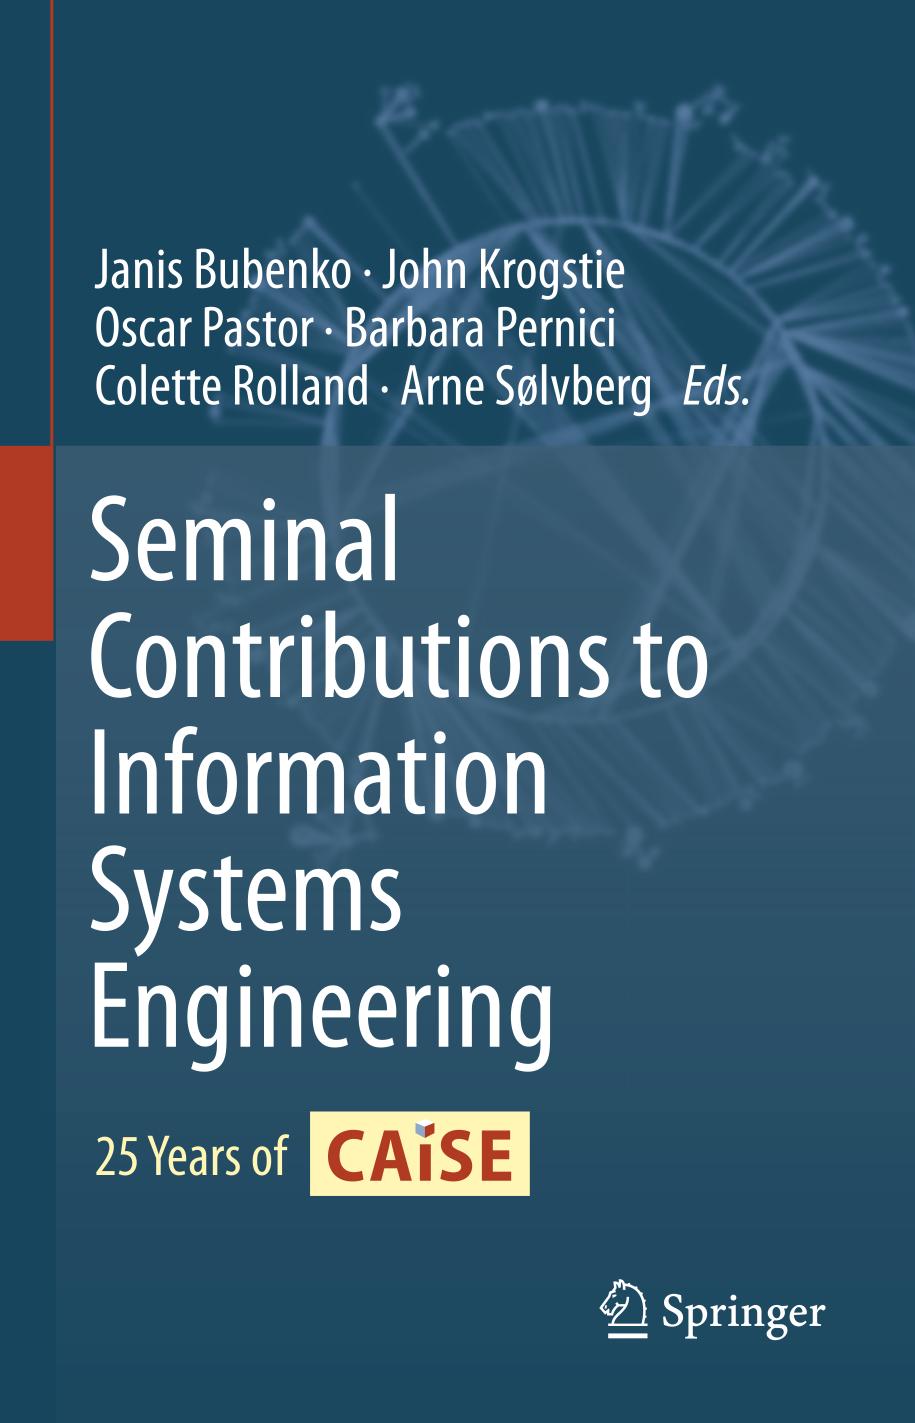 Seminal Contributions to Information Systems Engineering 25 Years of CAiSE